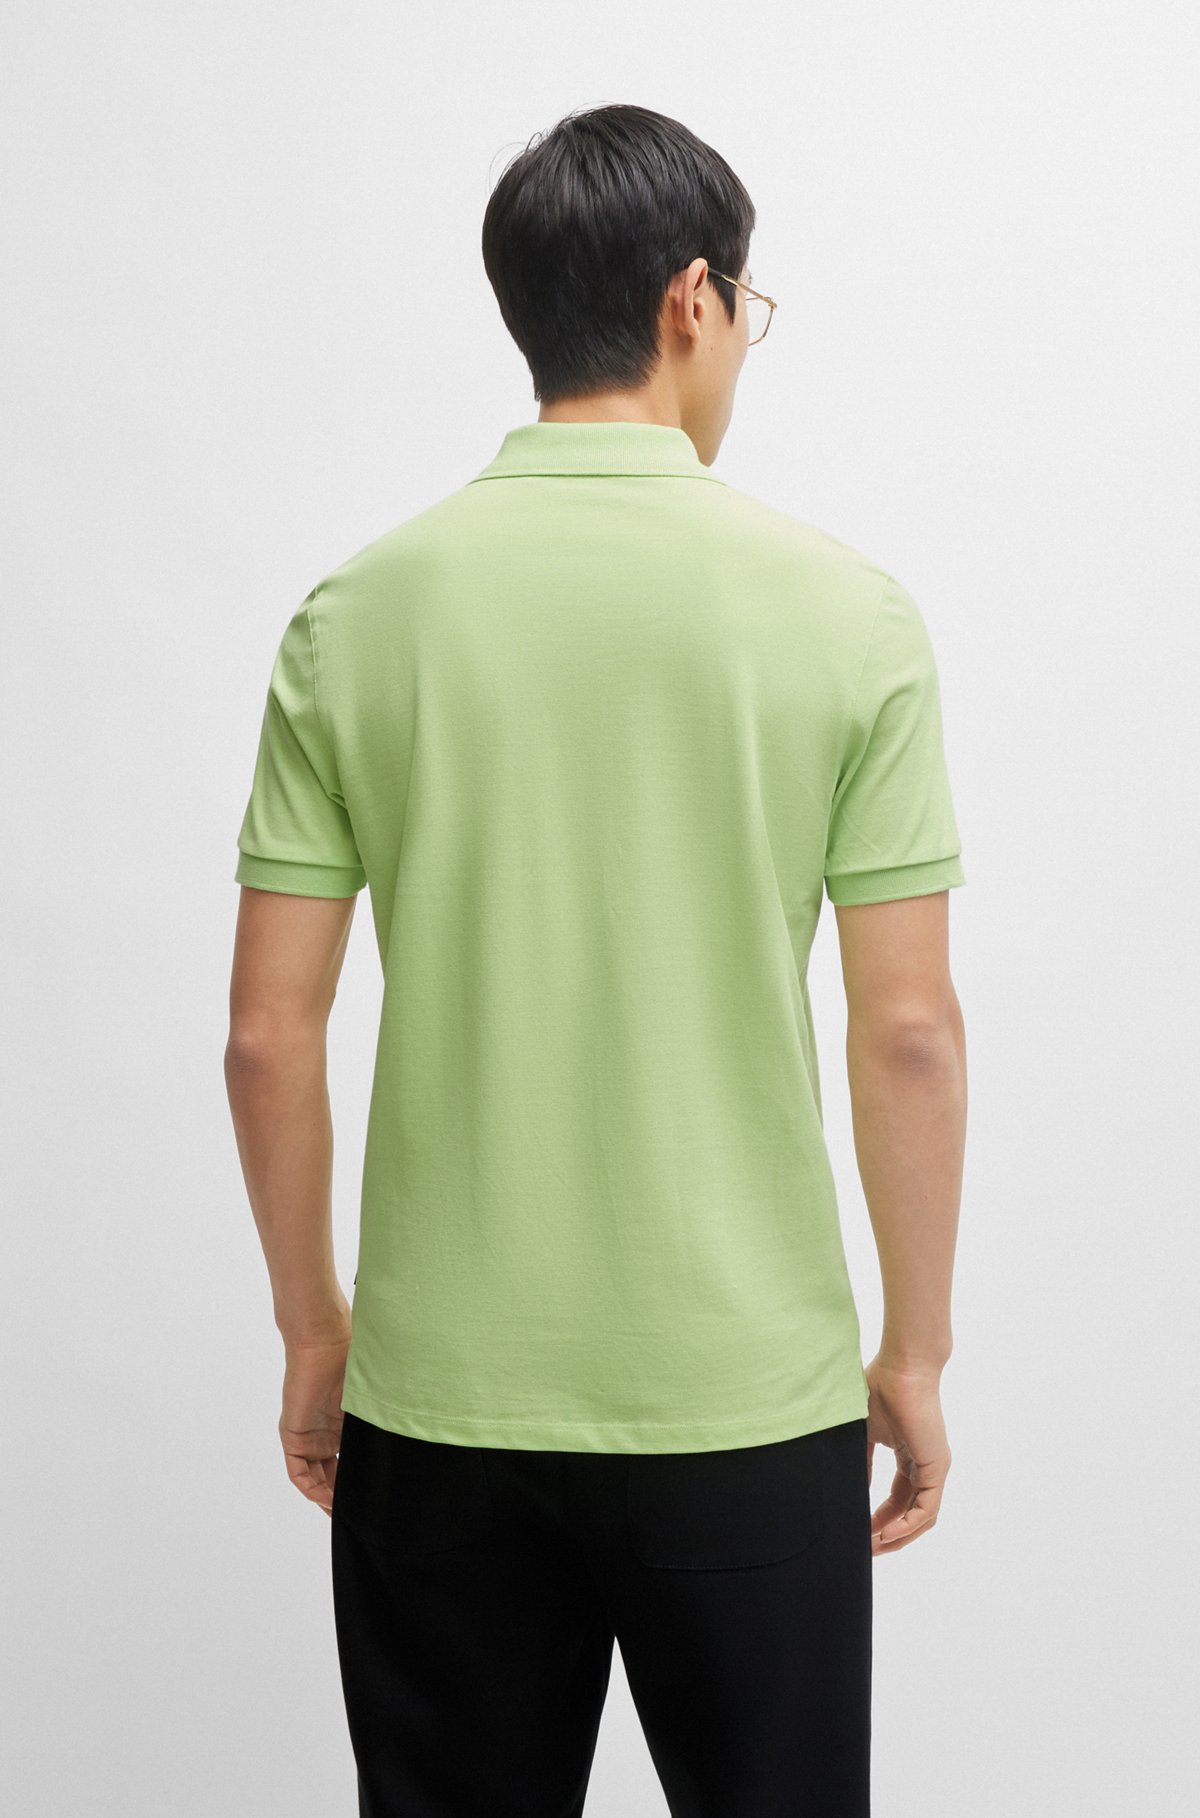 Cotton polo shirt with embroidered logo, Light Green